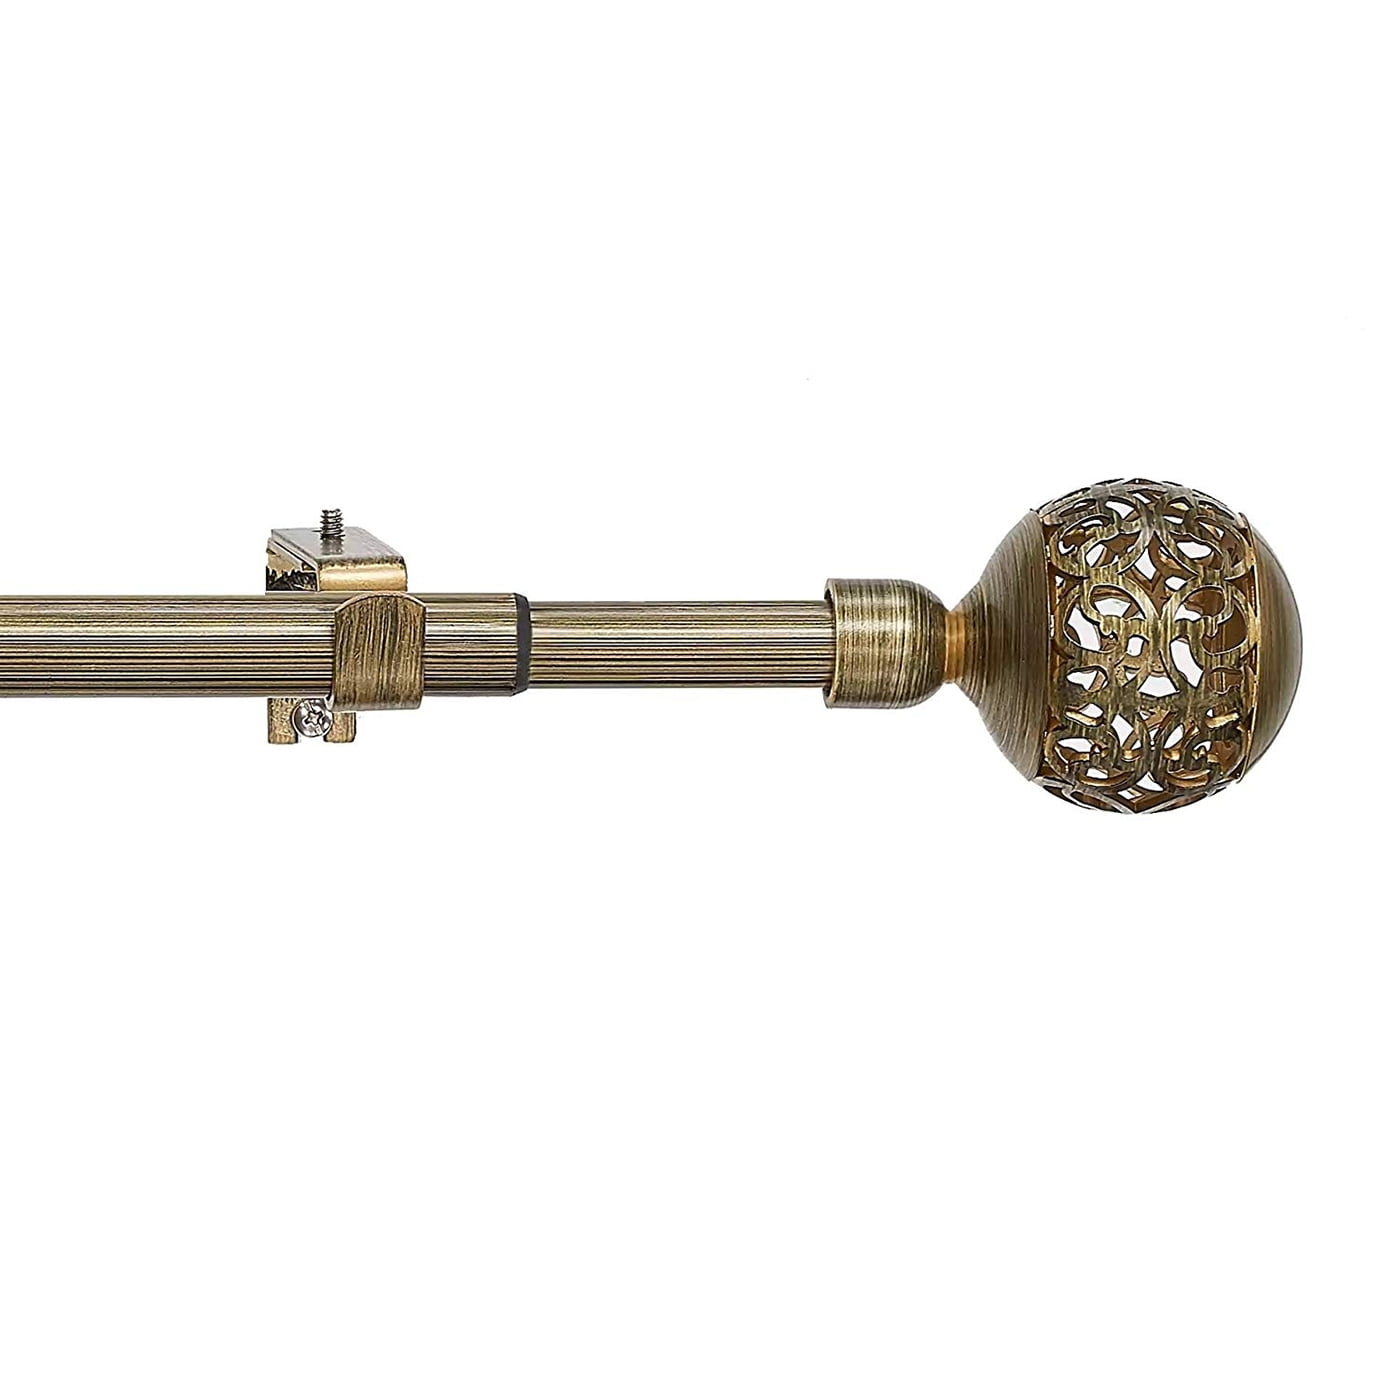 28mm Diameter Antique Copper Effect Metal Curtain Pole Various Sizes And Finials 